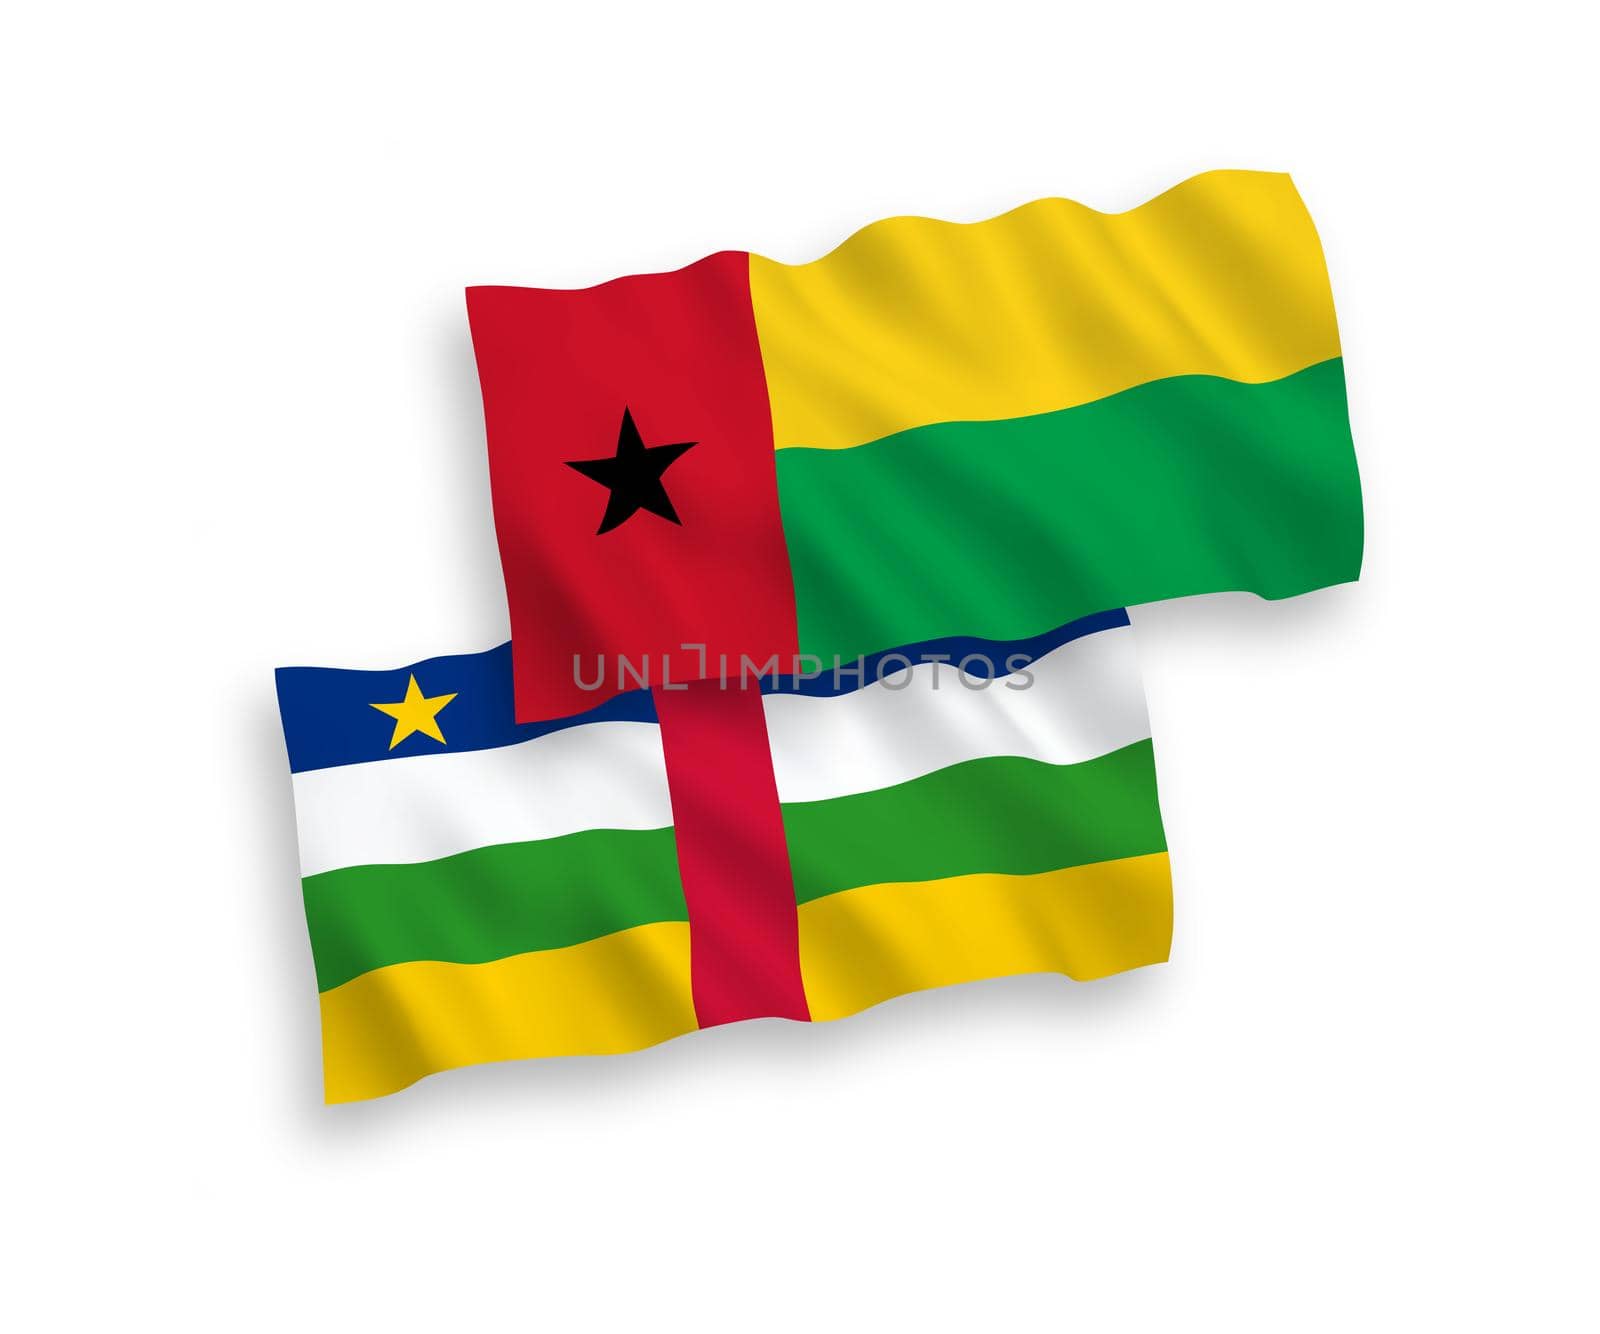 National fabric wave flags of Central African Republic and Republic of Guinea Bissau isolated on white background. 1 to 2 proportion.